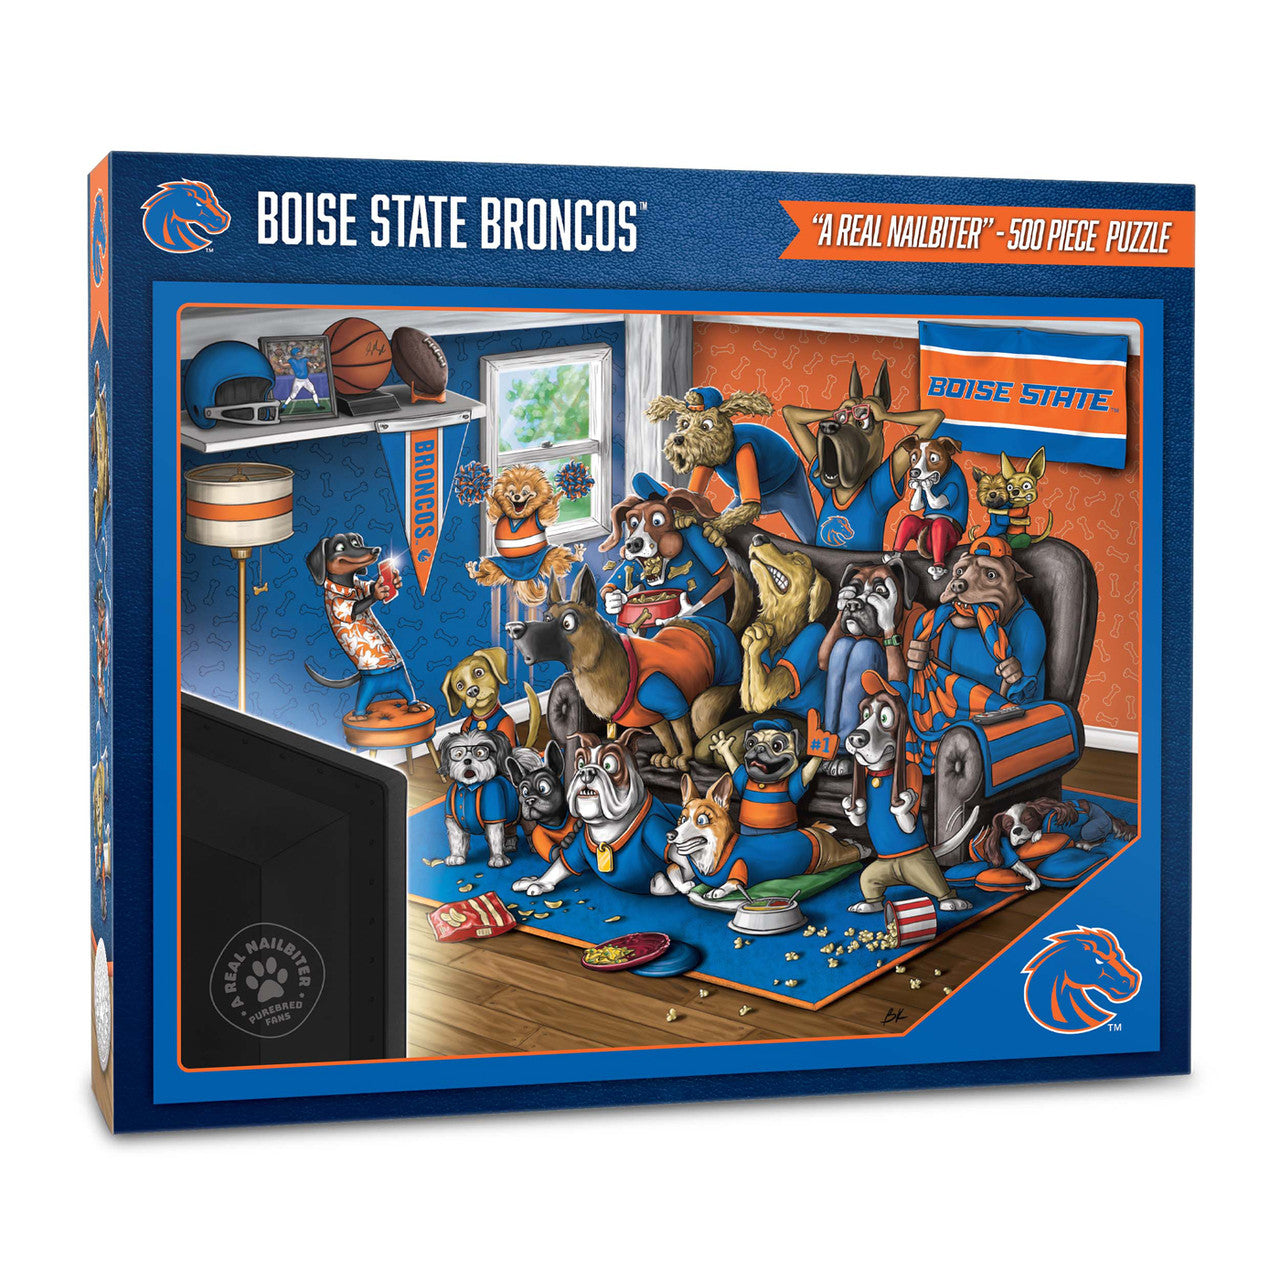 Boise State Broncos You The Fan 500 Piece "A Real Nailbiter" Puzzle